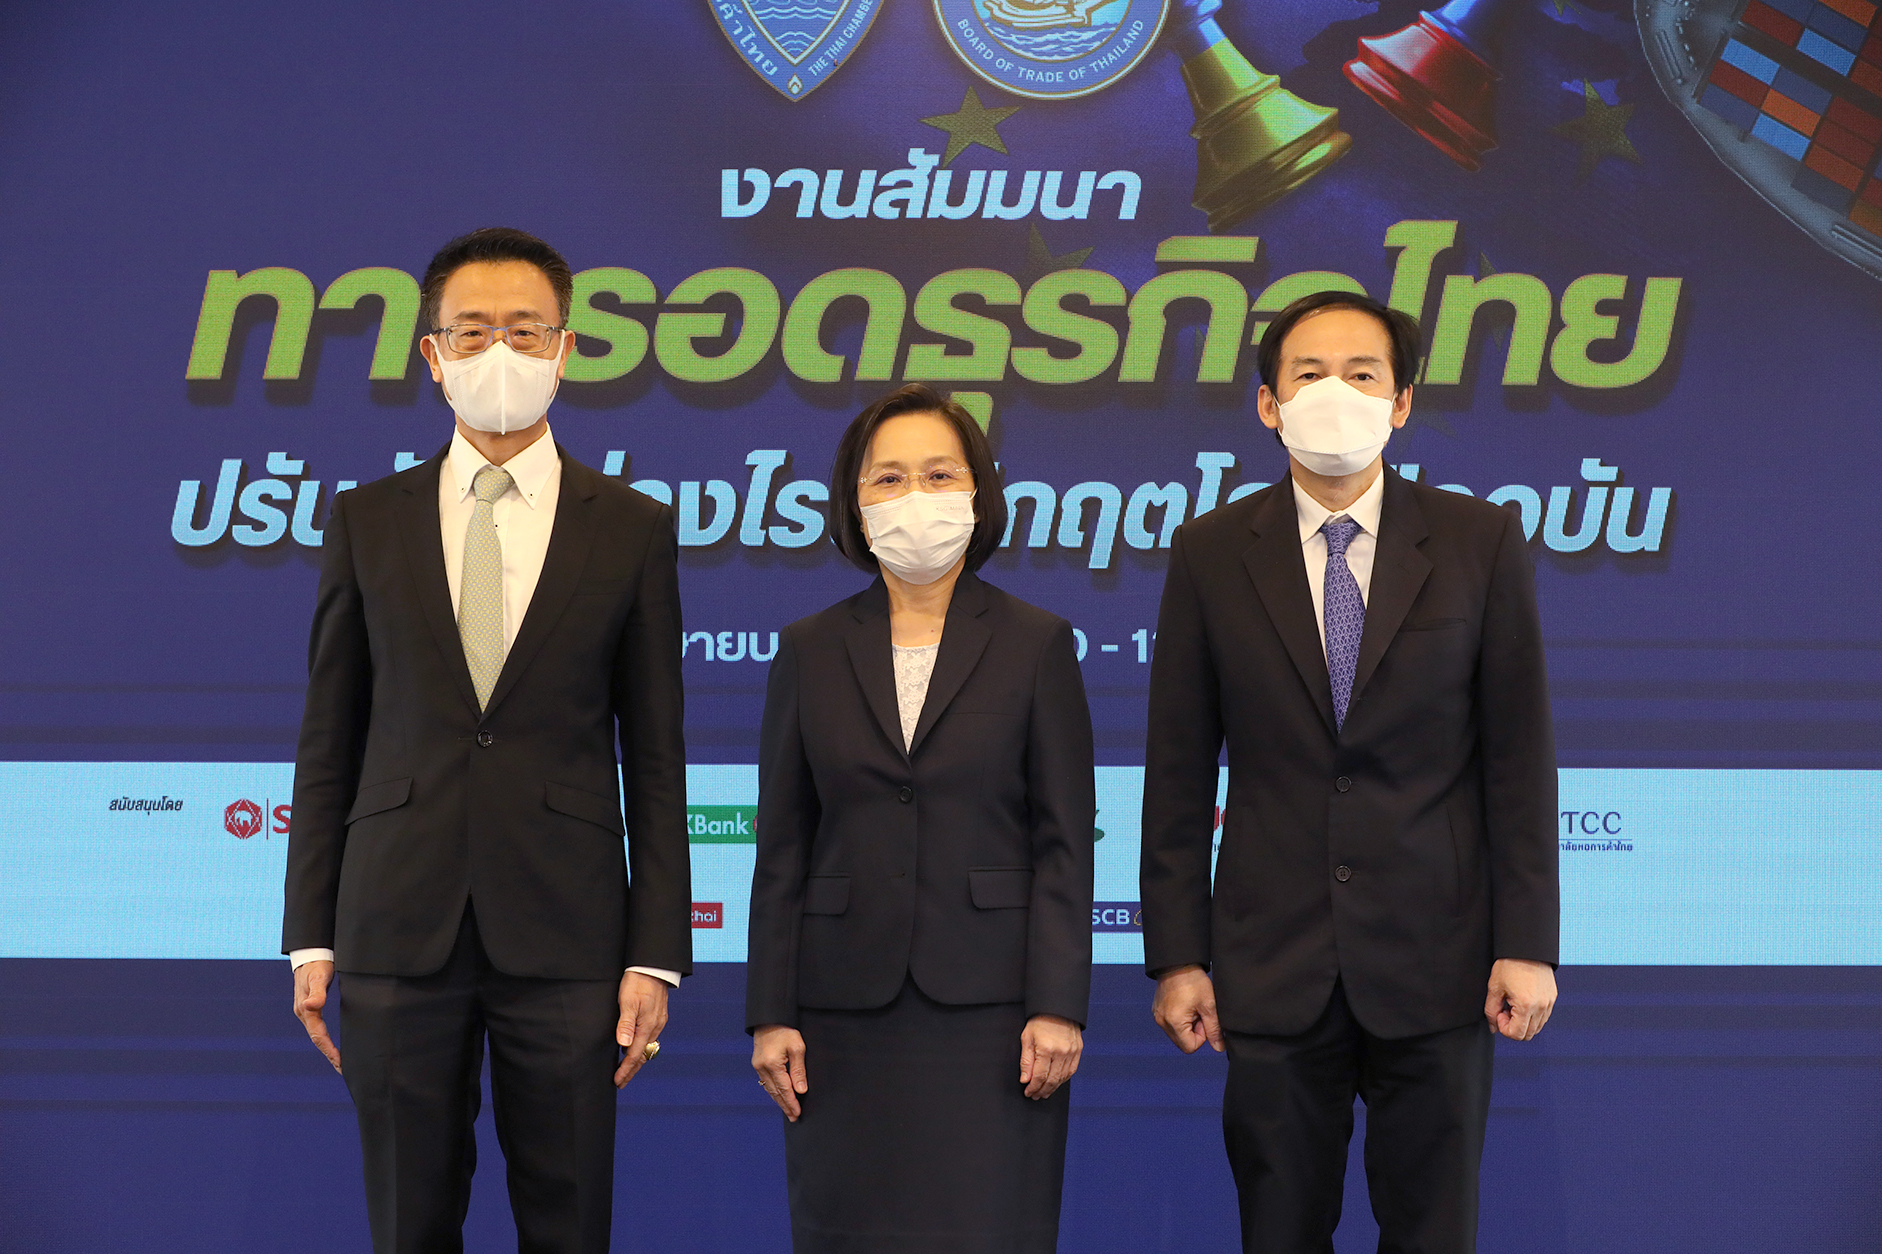 EXIM Thailand Joins as a Speaker at a Seminar on  “Thai Business Survival: How to Cope with Current Global Crises”